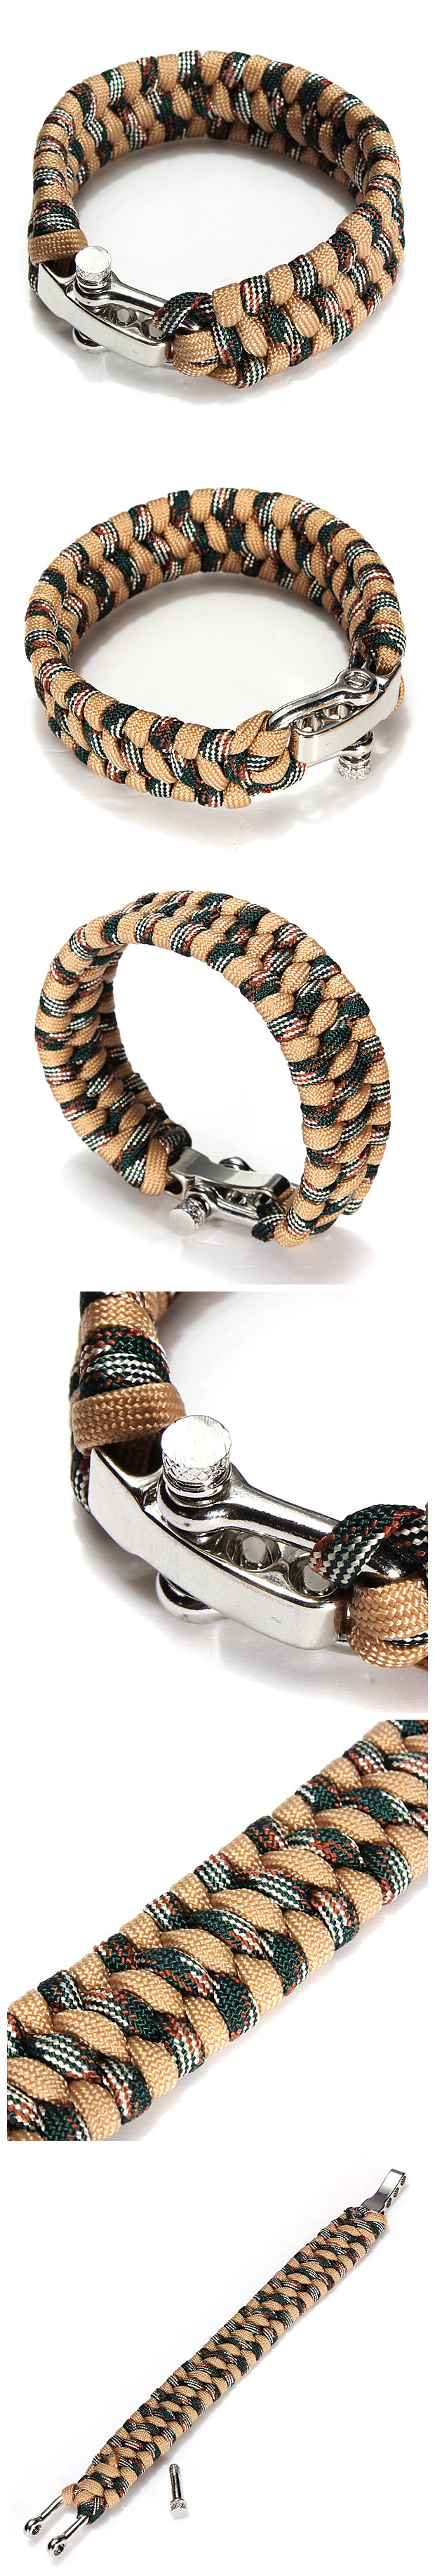 7-Strands-ParaCord-Bracelet-String-Cord-Hand-Ring-With-Quick-Release-Shackle-Buckle-For-Survival-80636-5